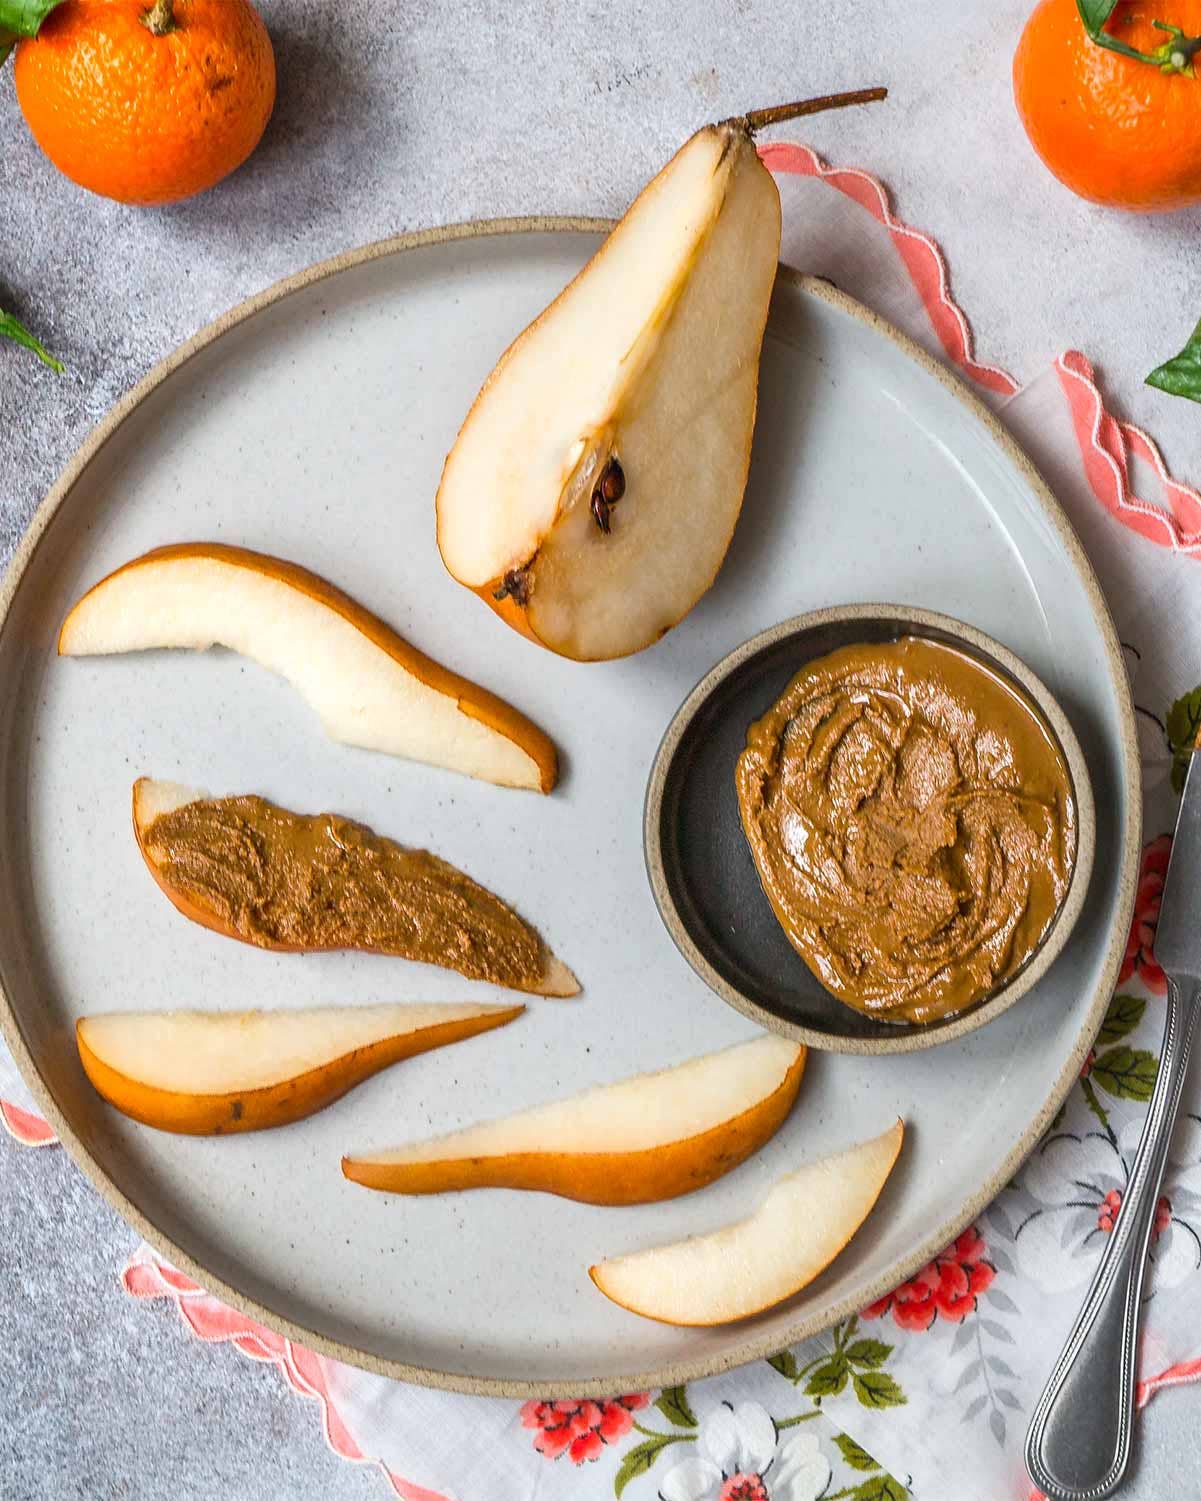 Almond butter on pear slices